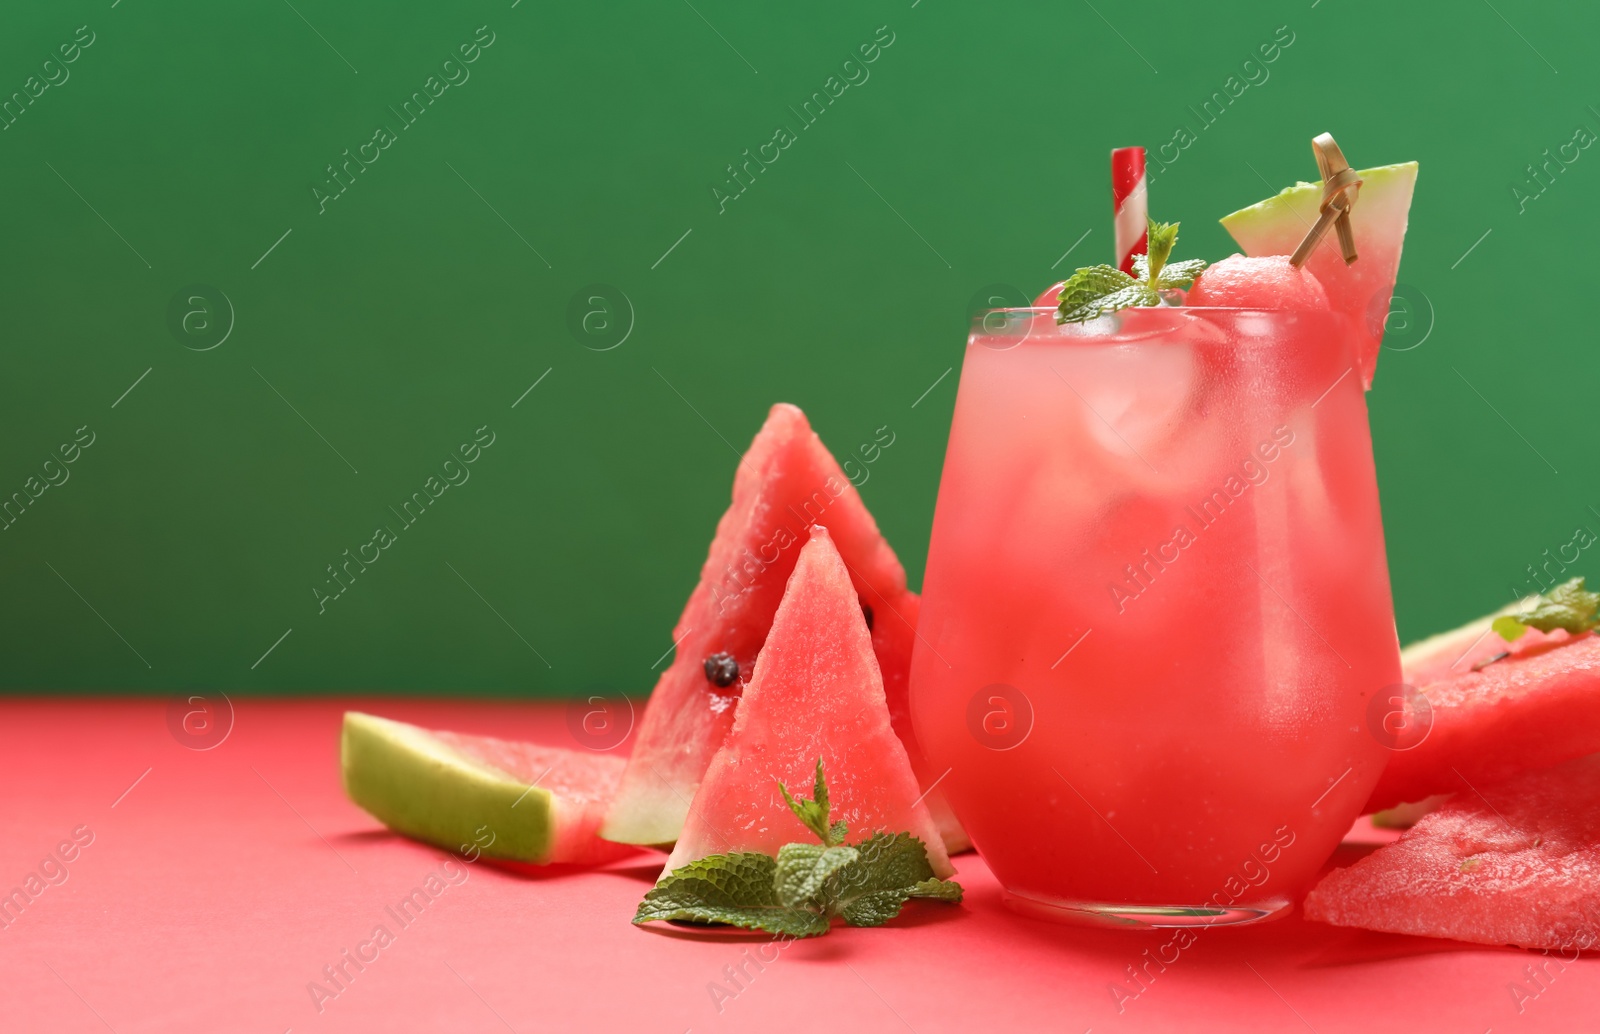 Photo of Tasty watermelon drink and fresh fruits on red table against green background. Space for text